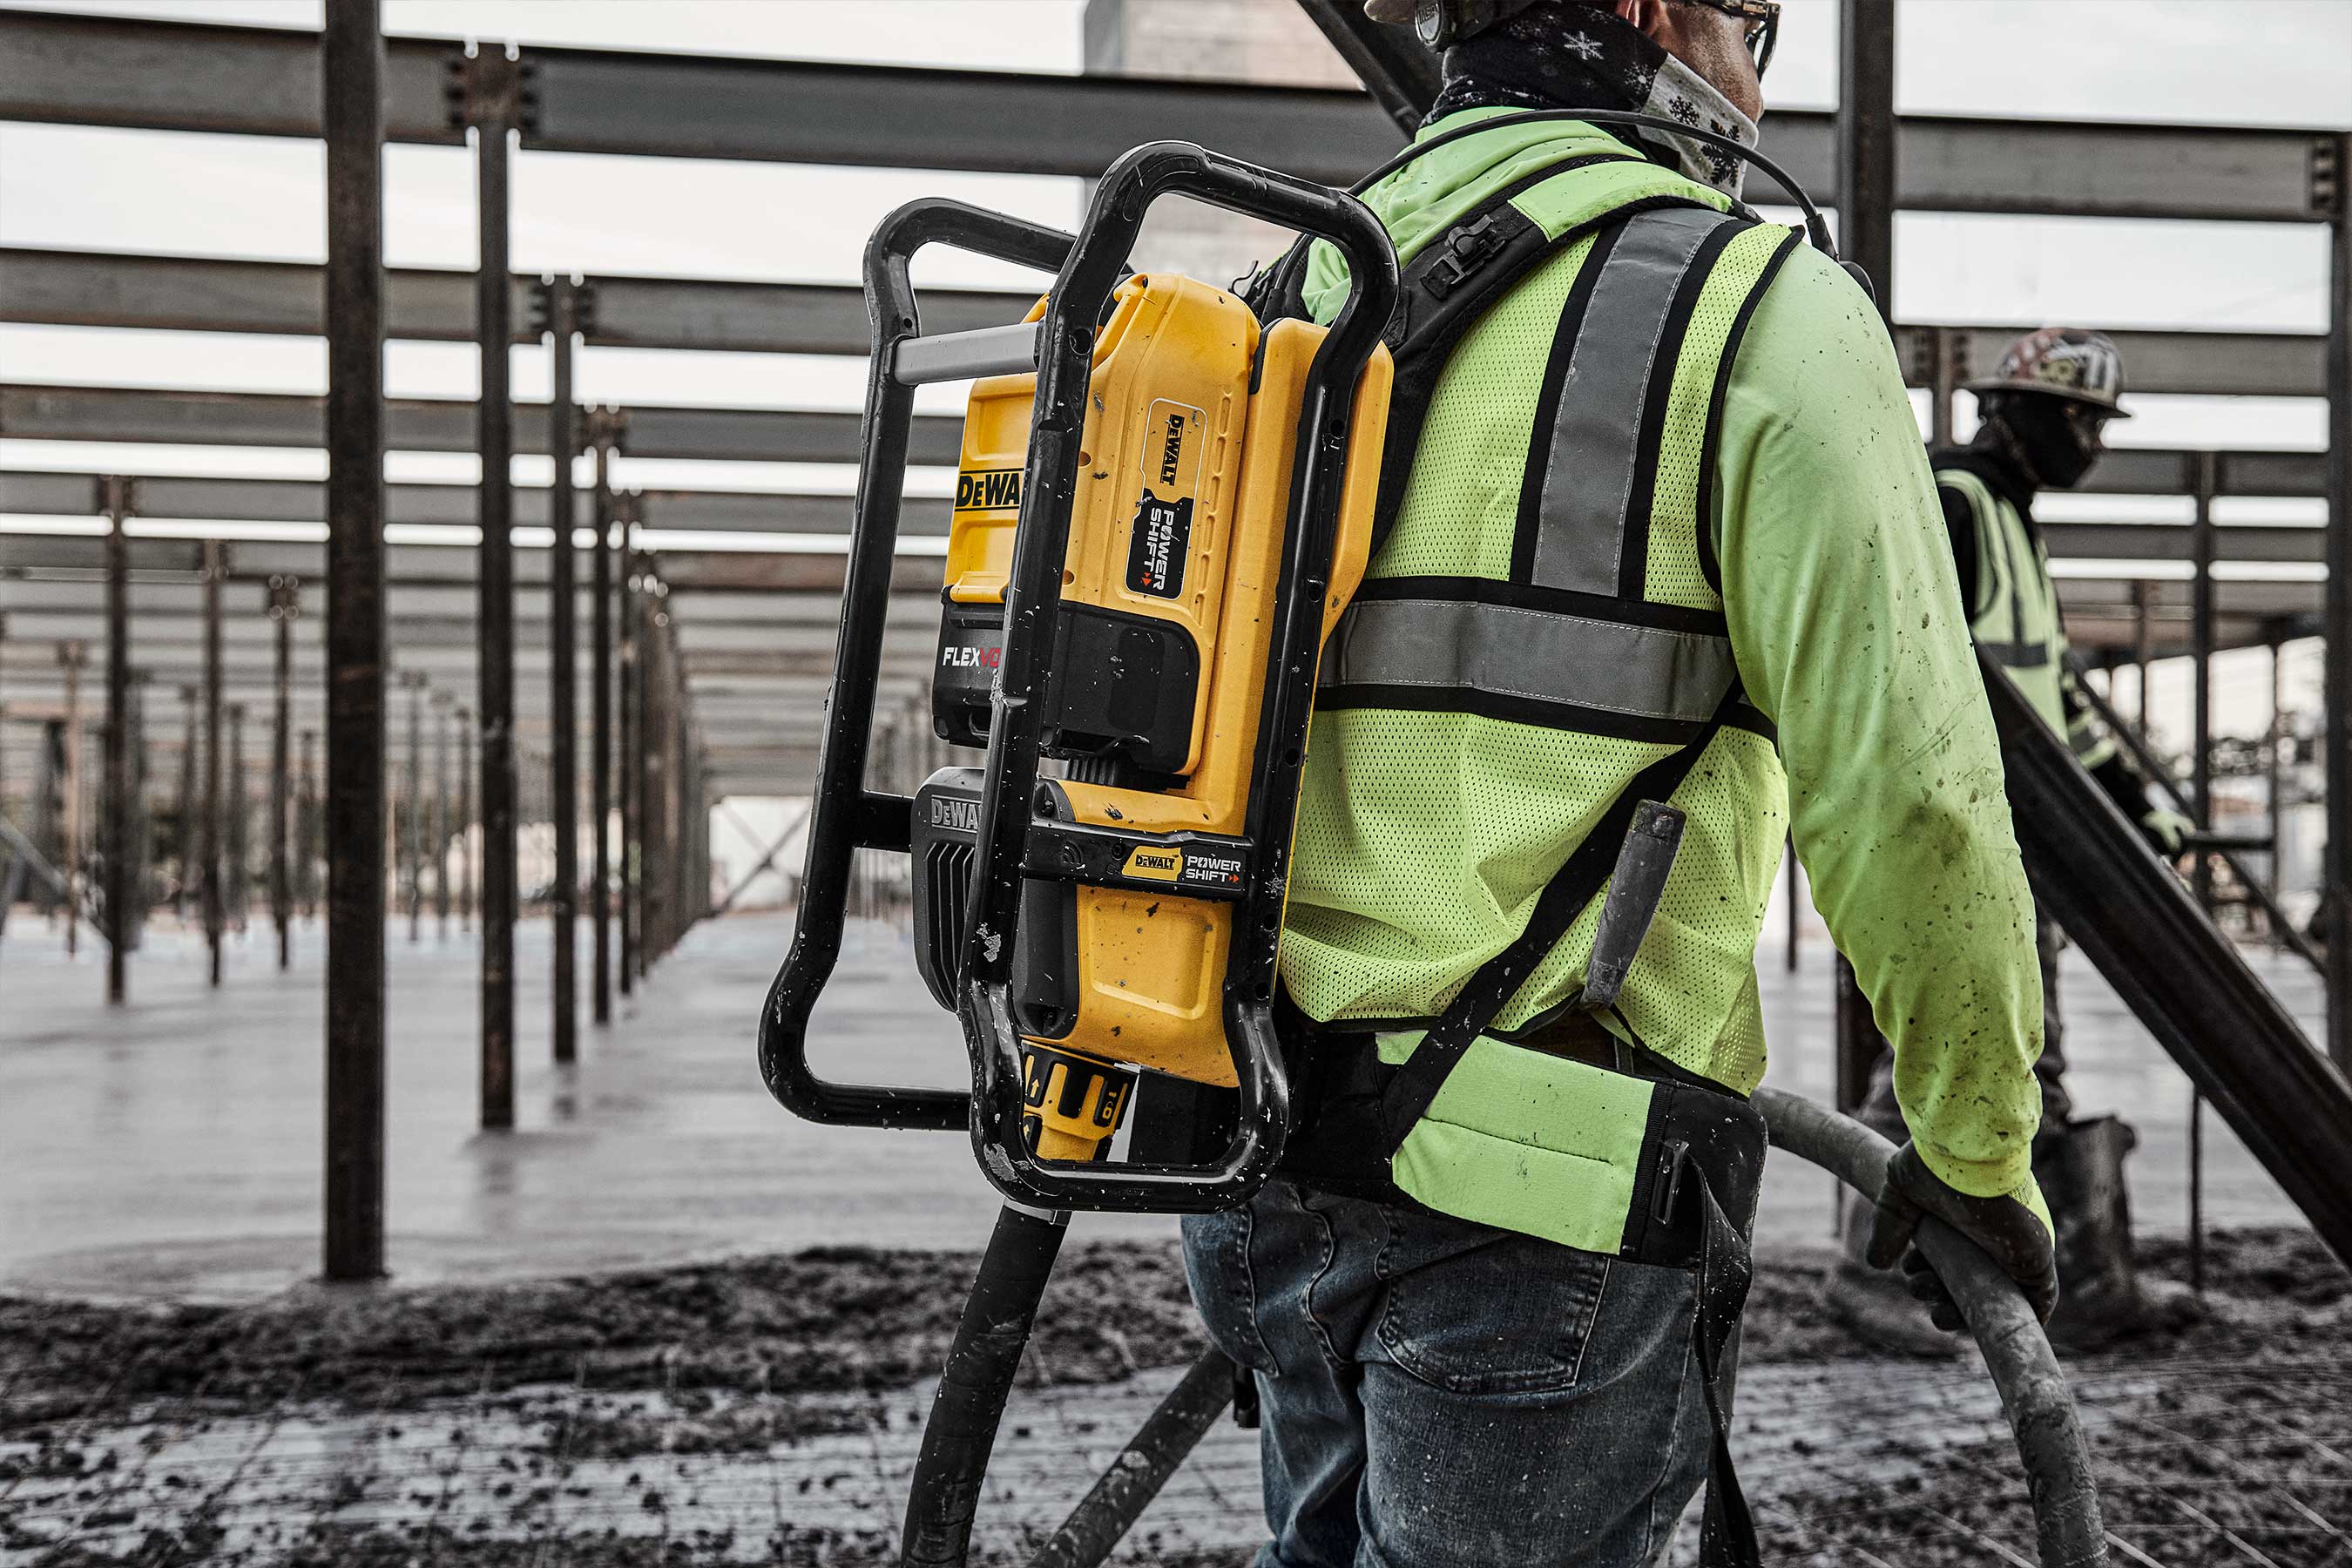 The DEWALT POWERSHIFT™ Backpack Vibrator is lightweight at only 25 lbs. with the DEWALT POWERSHIFT™ battery installed and features a durable roll cage with fully adjustable hi-vis harness.